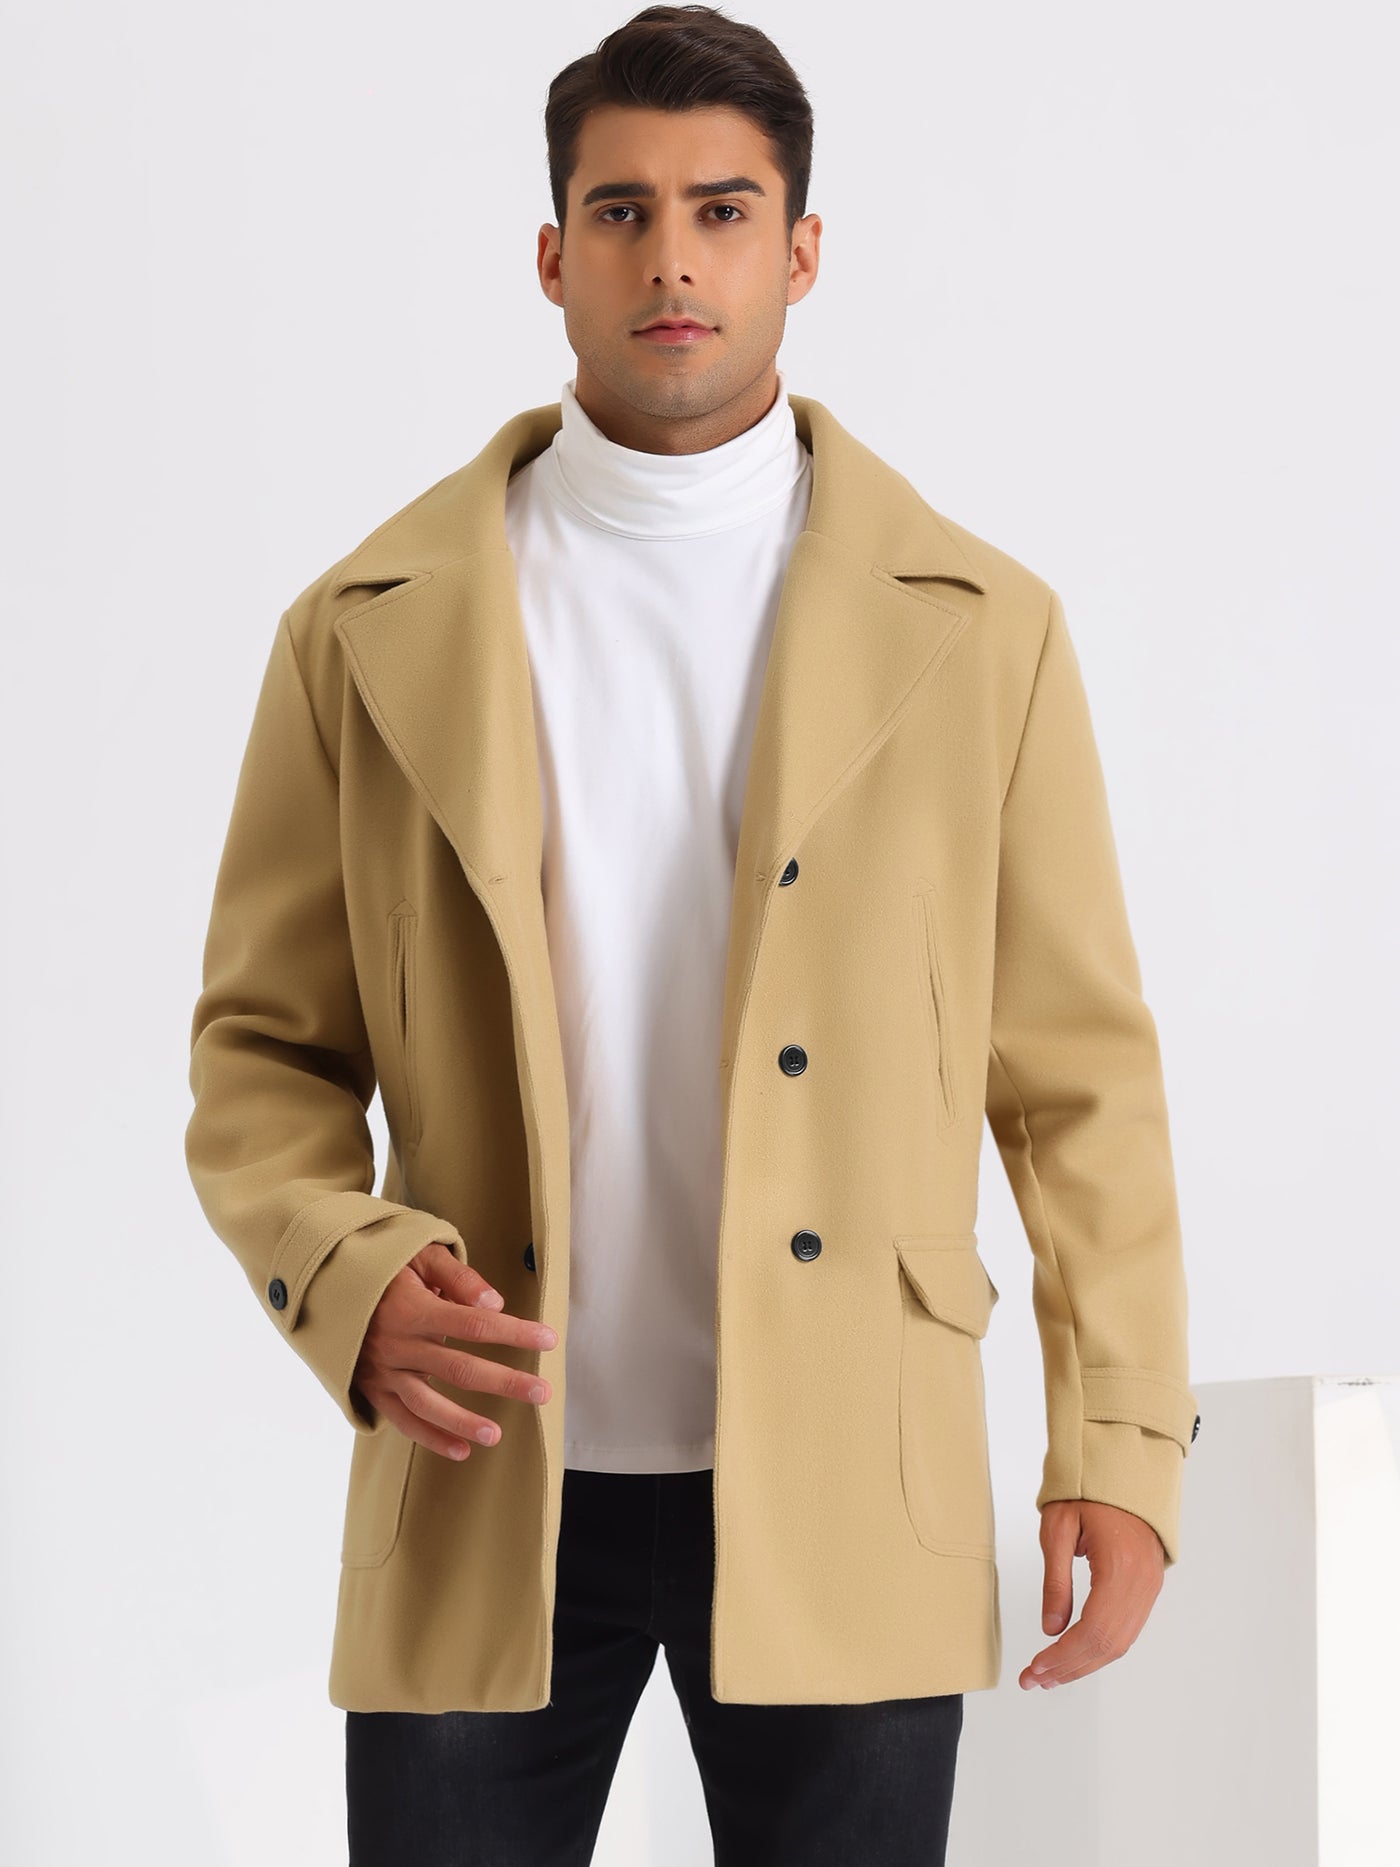 Bublédon Double Breasted Pea Coat for Men's Notched Collar Classic Winter Overcoat